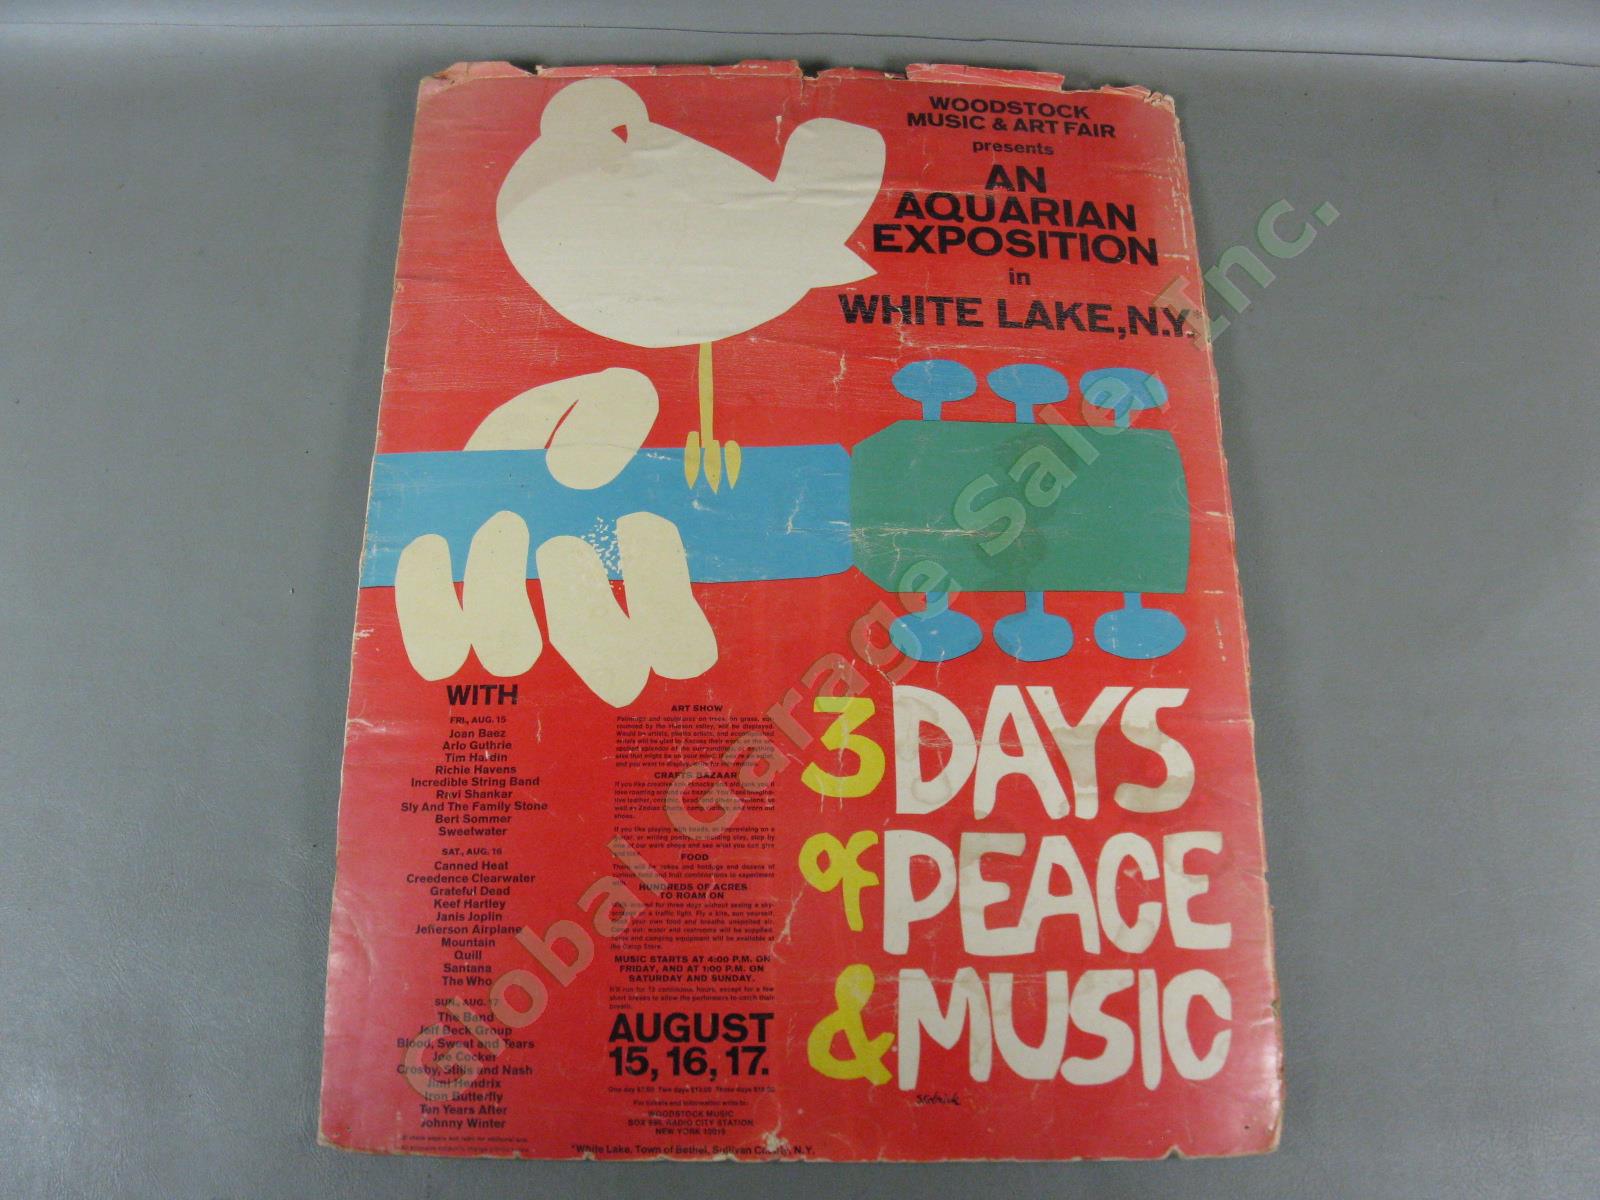 2 RARE Woodstock Sat/Sun $7 Full Tickets Black/Red Ink + 18"x24" Poster NO RES!! 3